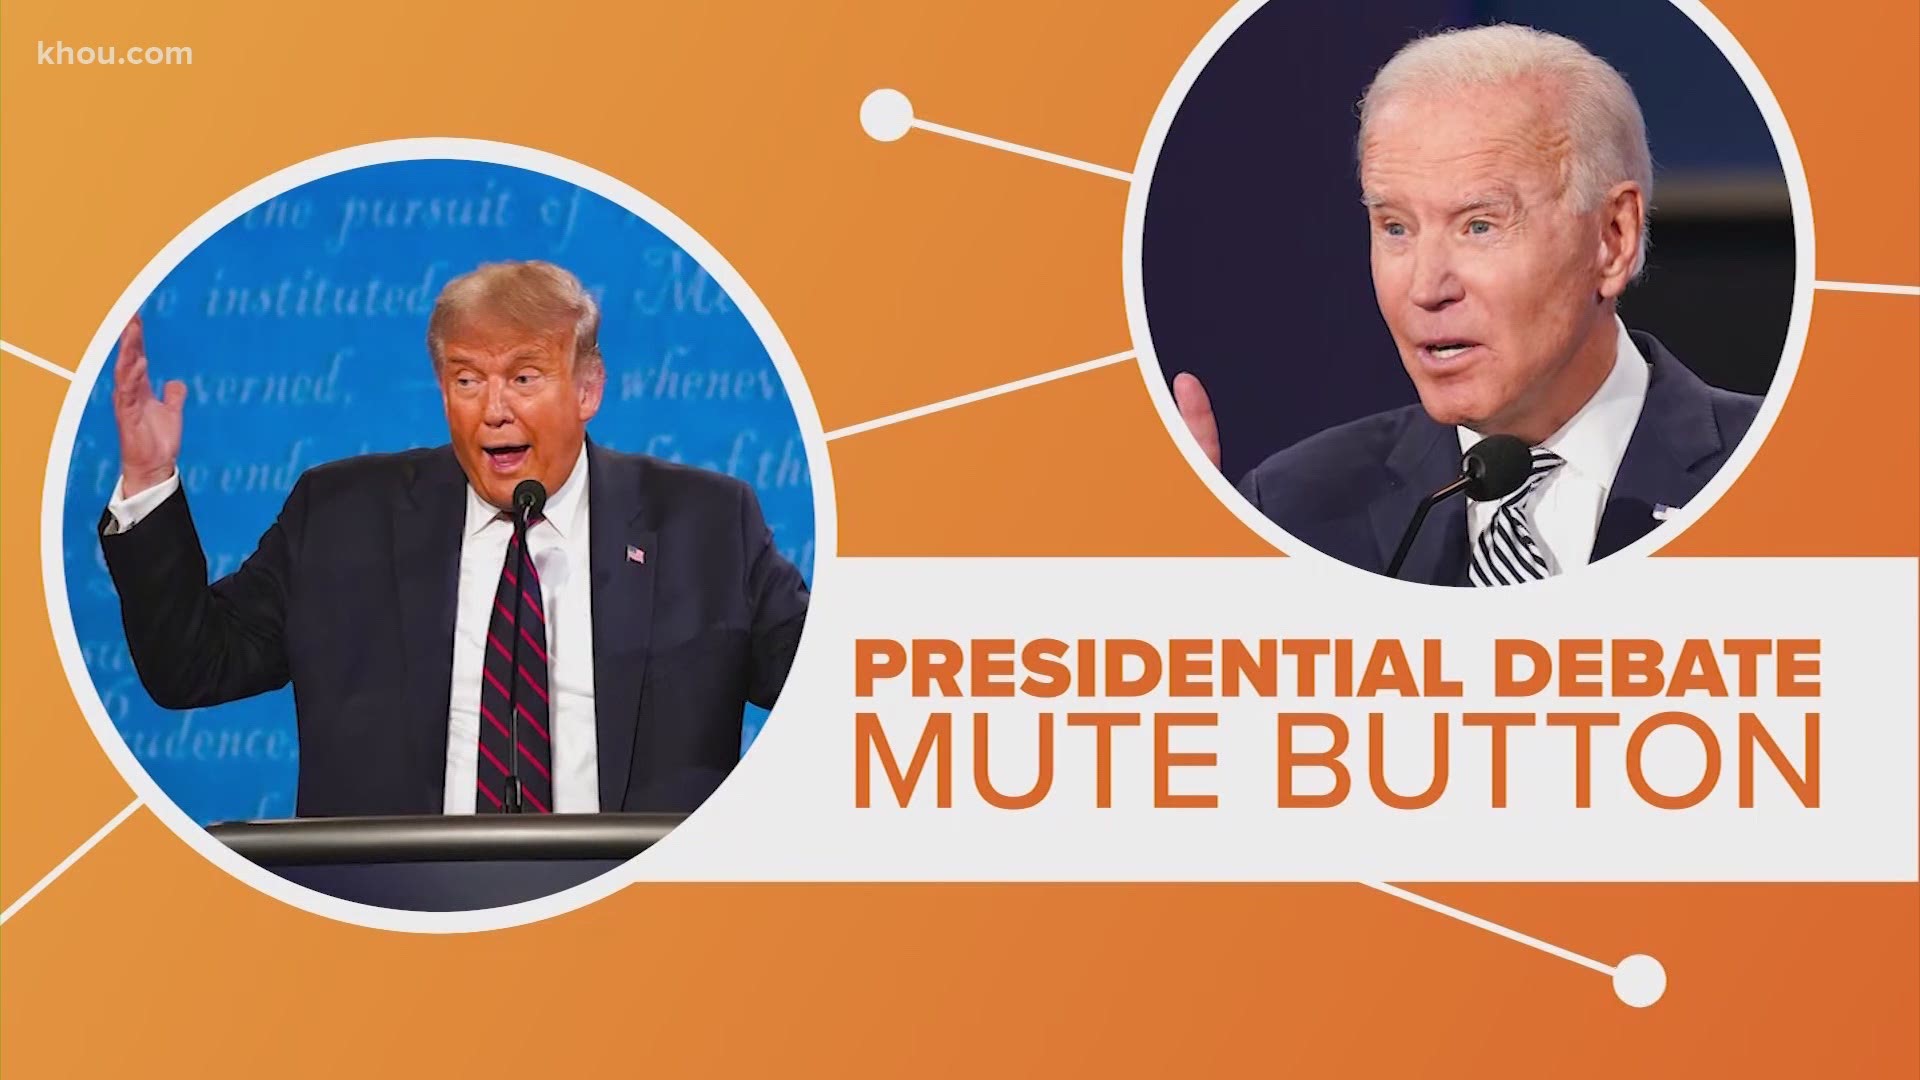 The presidential debate commission has added a new element to the normally predictable debate format -- a mute button. Let's connect the dots.